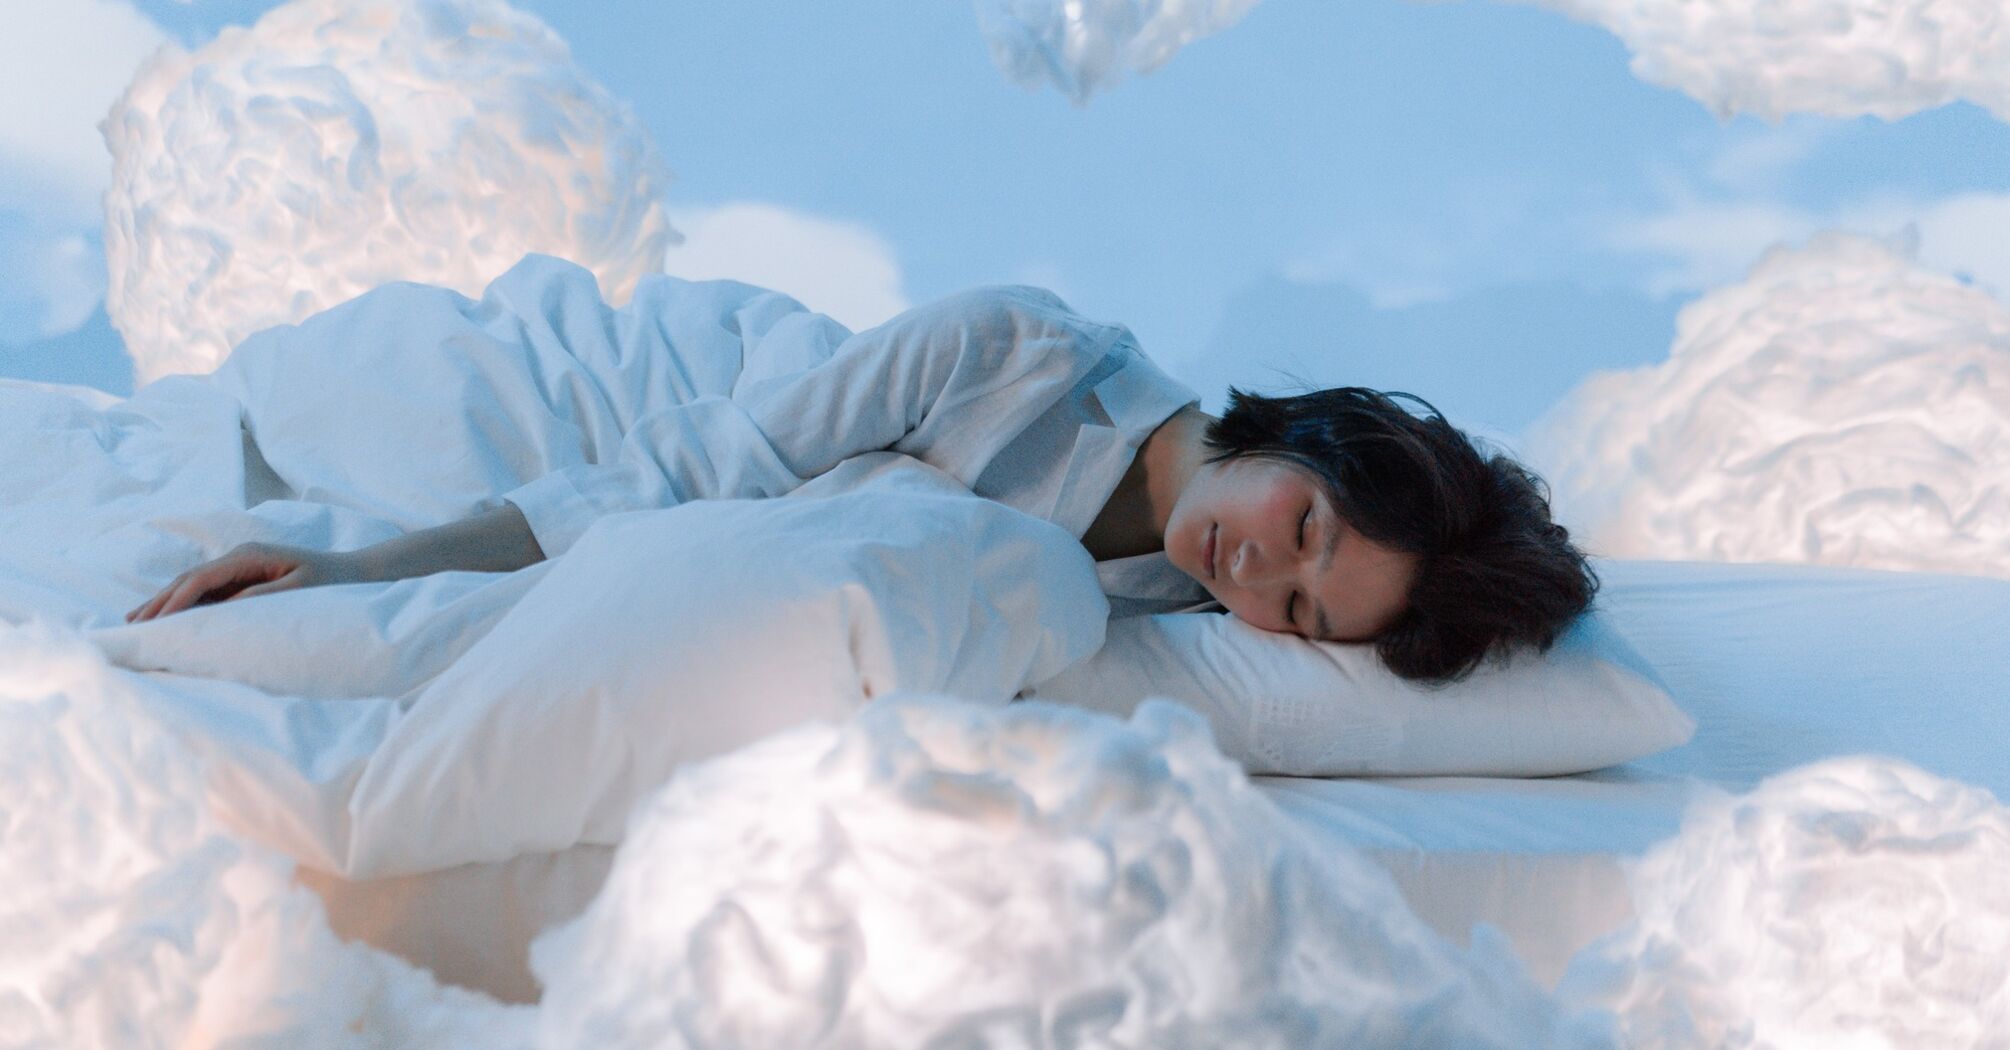 We reveal the secrets of dreams from Thursday to Friday